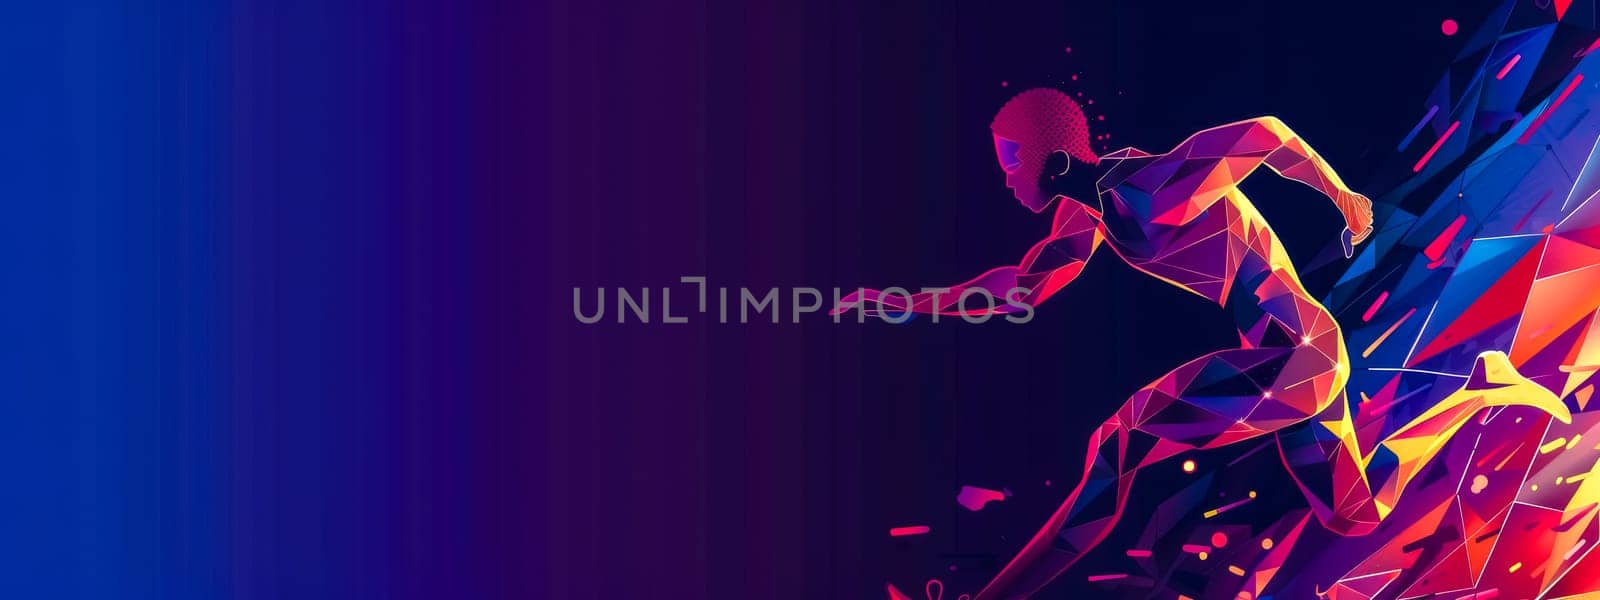 Abstract image of a dynamic runner with vibrant digital effects on a blue gradient background